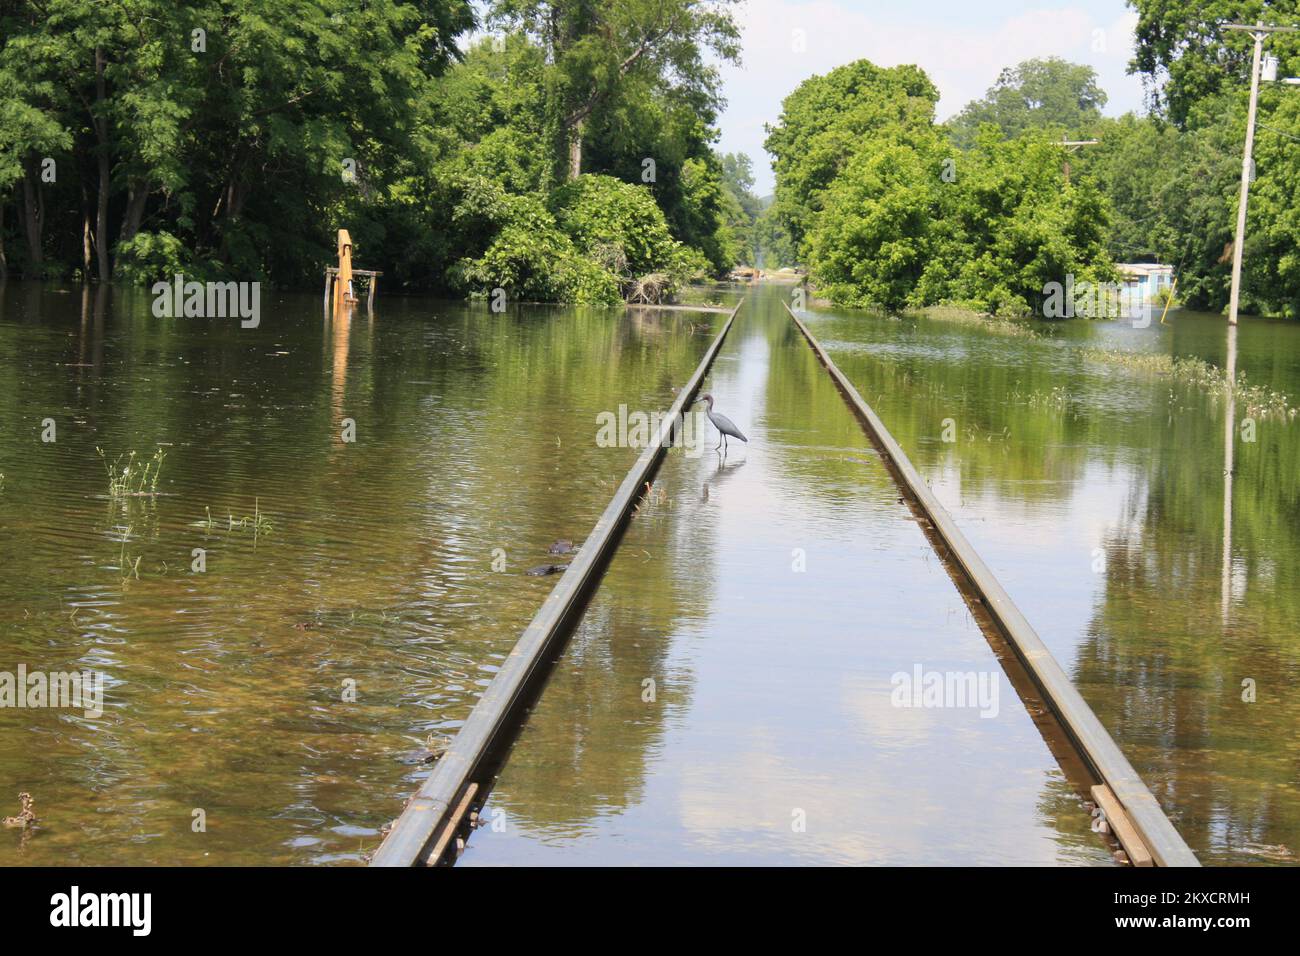 Flooding - Vicksburg, Miss. , May 13, 2011   A heron hunts for a snack along the tracks of the Kansas City Railroad in Vicksburg Mississippi. FEMA assists residents and business affected by the flooding. Howard Greenblatt/ FEMA. Mississippi Flooding. Photographs Relating to Disasters and Emergency Management Programs, Activities, and Officials Stock Photo